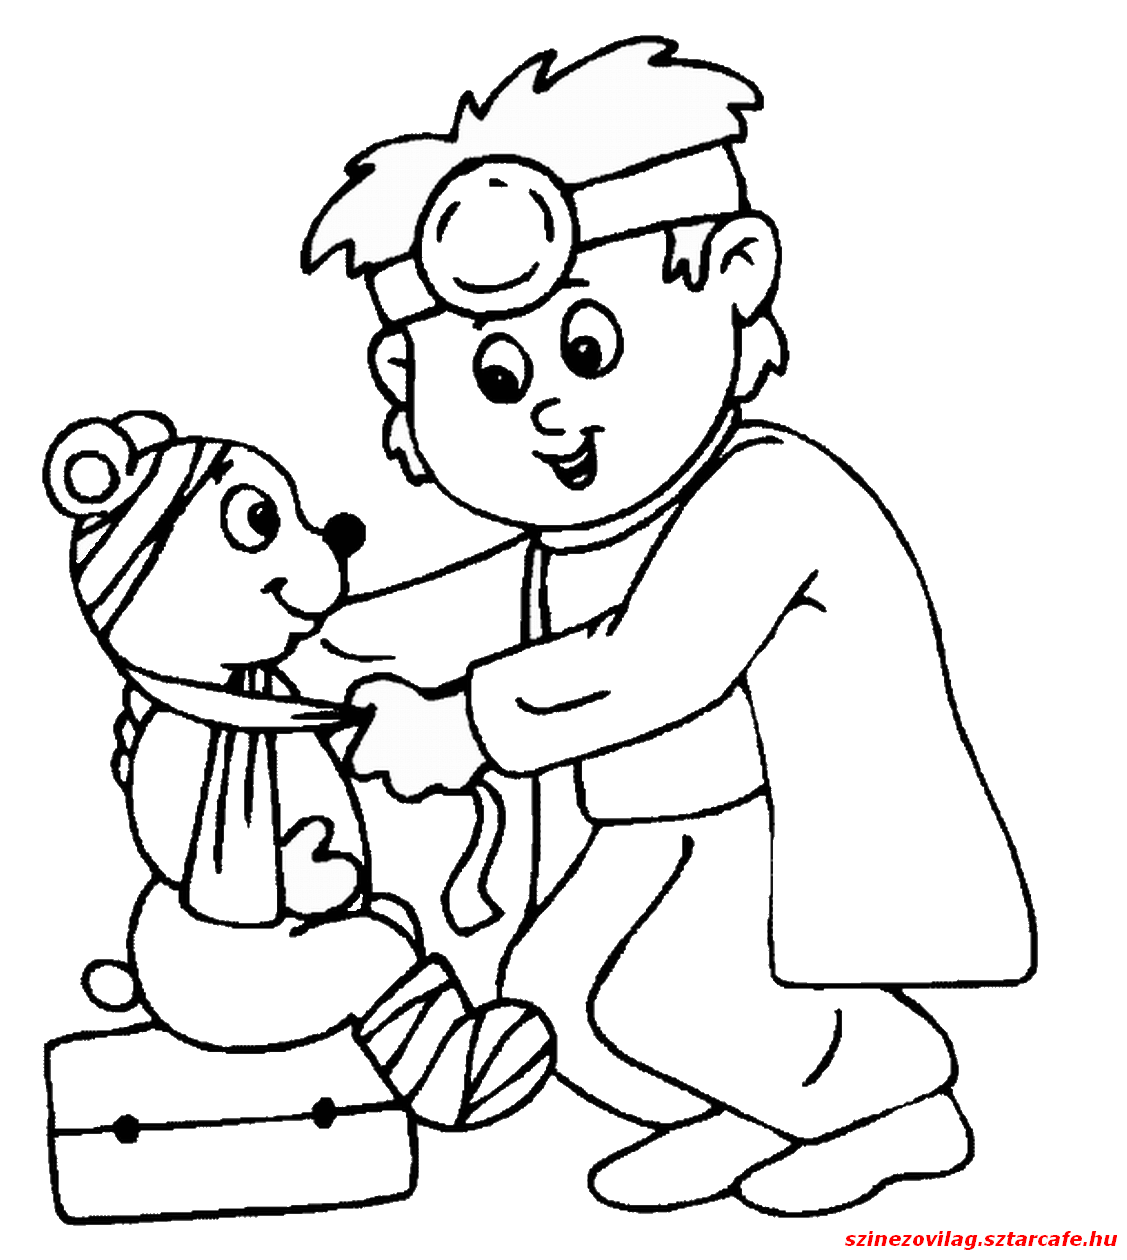 american red cross first aid coloring pages